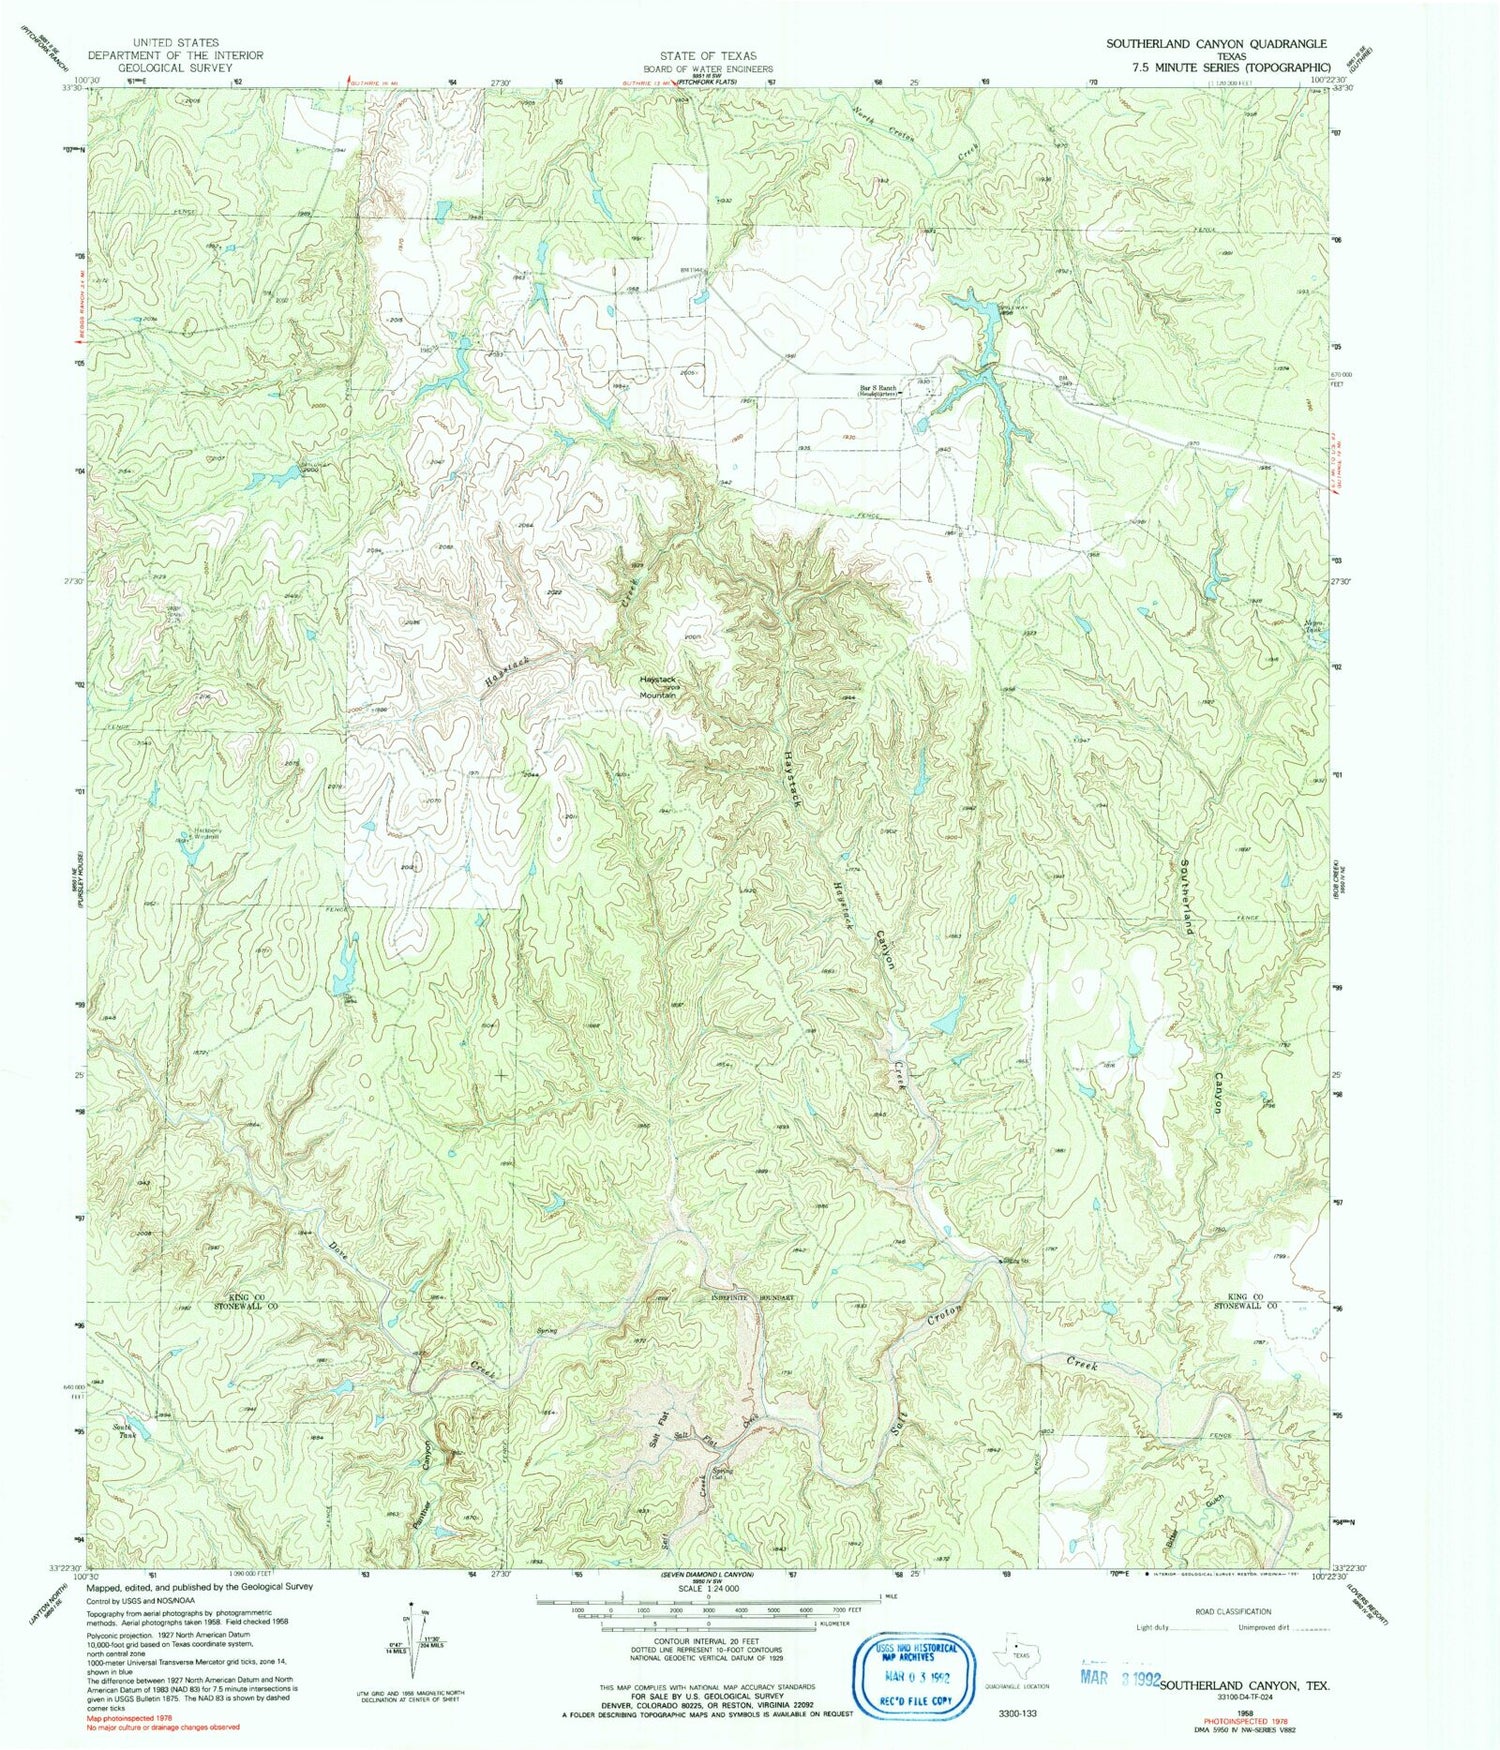 Classic USGS Southerland Canyon Texas 7.5'x7.5' Topo Map Image